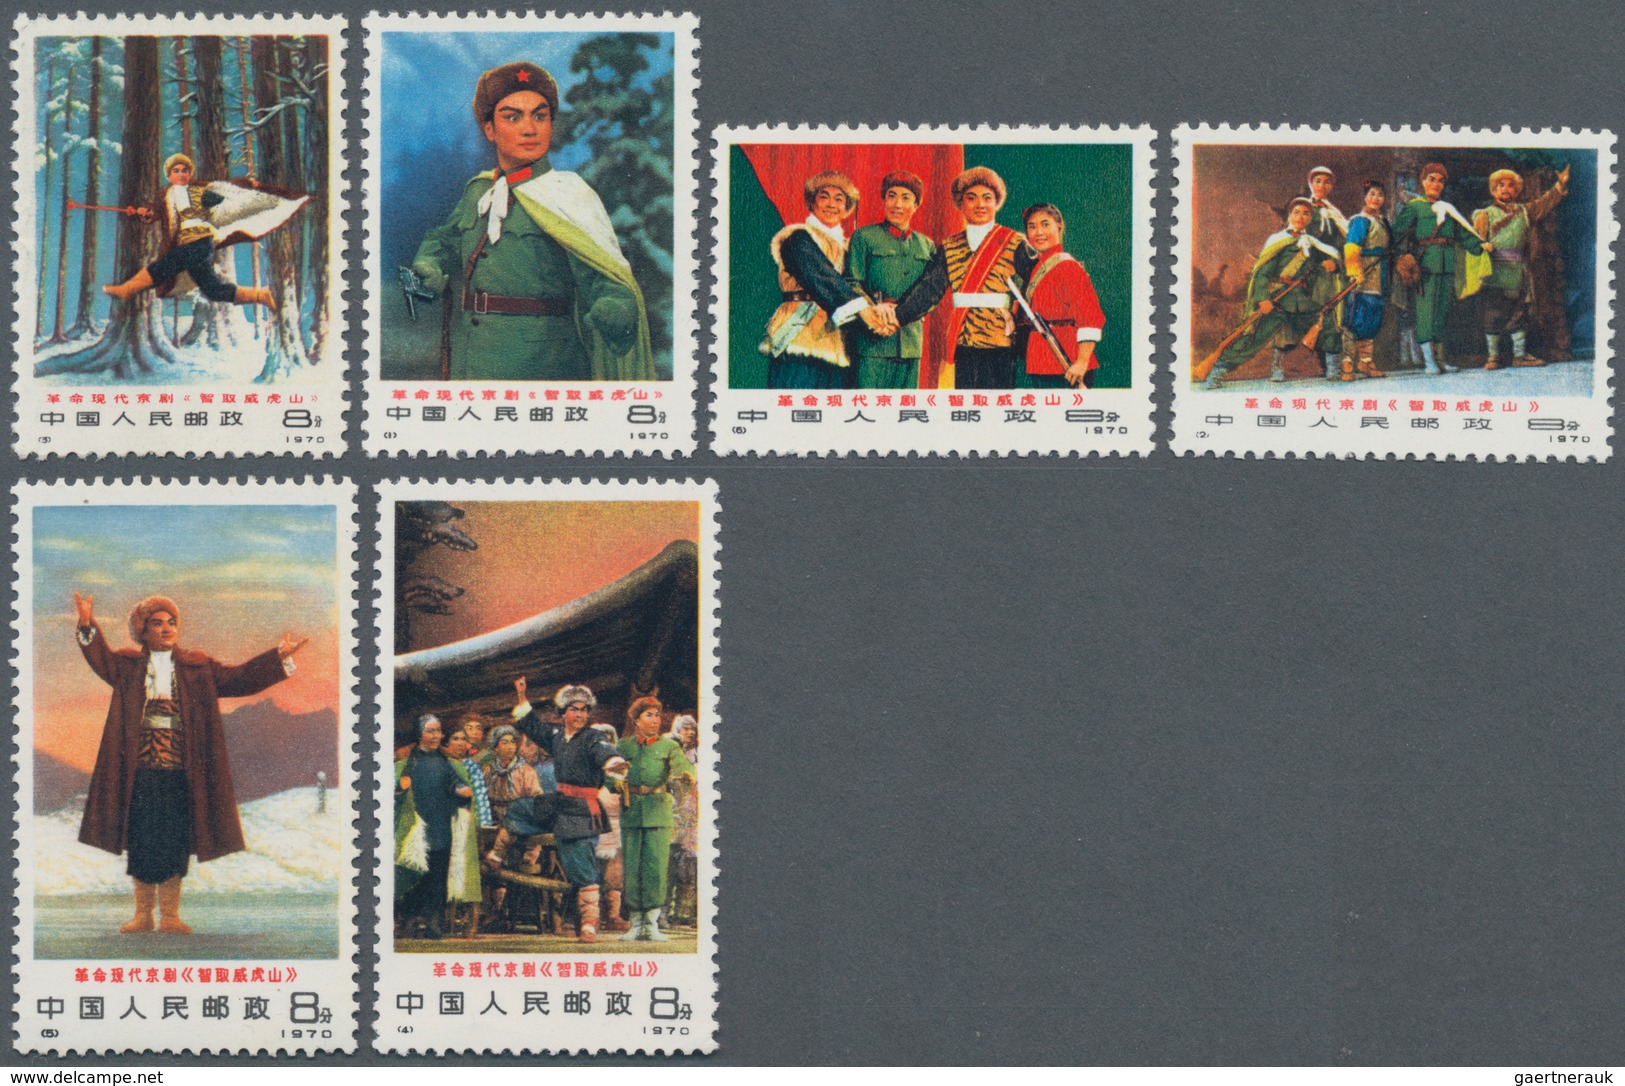 China - Volksrepublik: 1968/1971, five issues MNH: Communist Party (W15), Piano Music (W16), Chinese